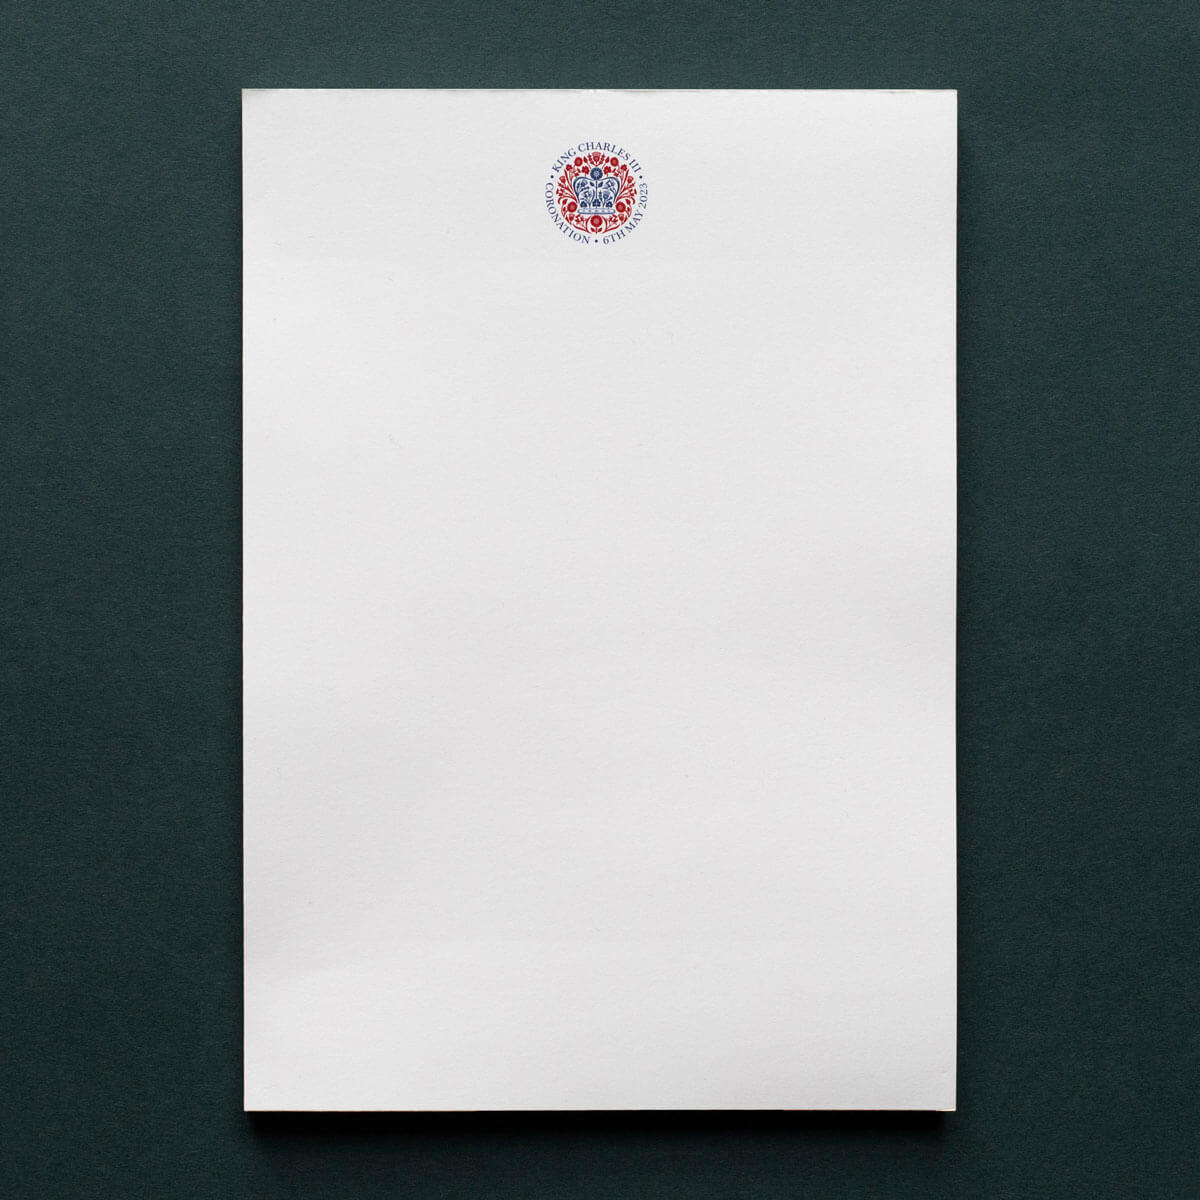 printed red and blue logo headed notepad king charles coronation